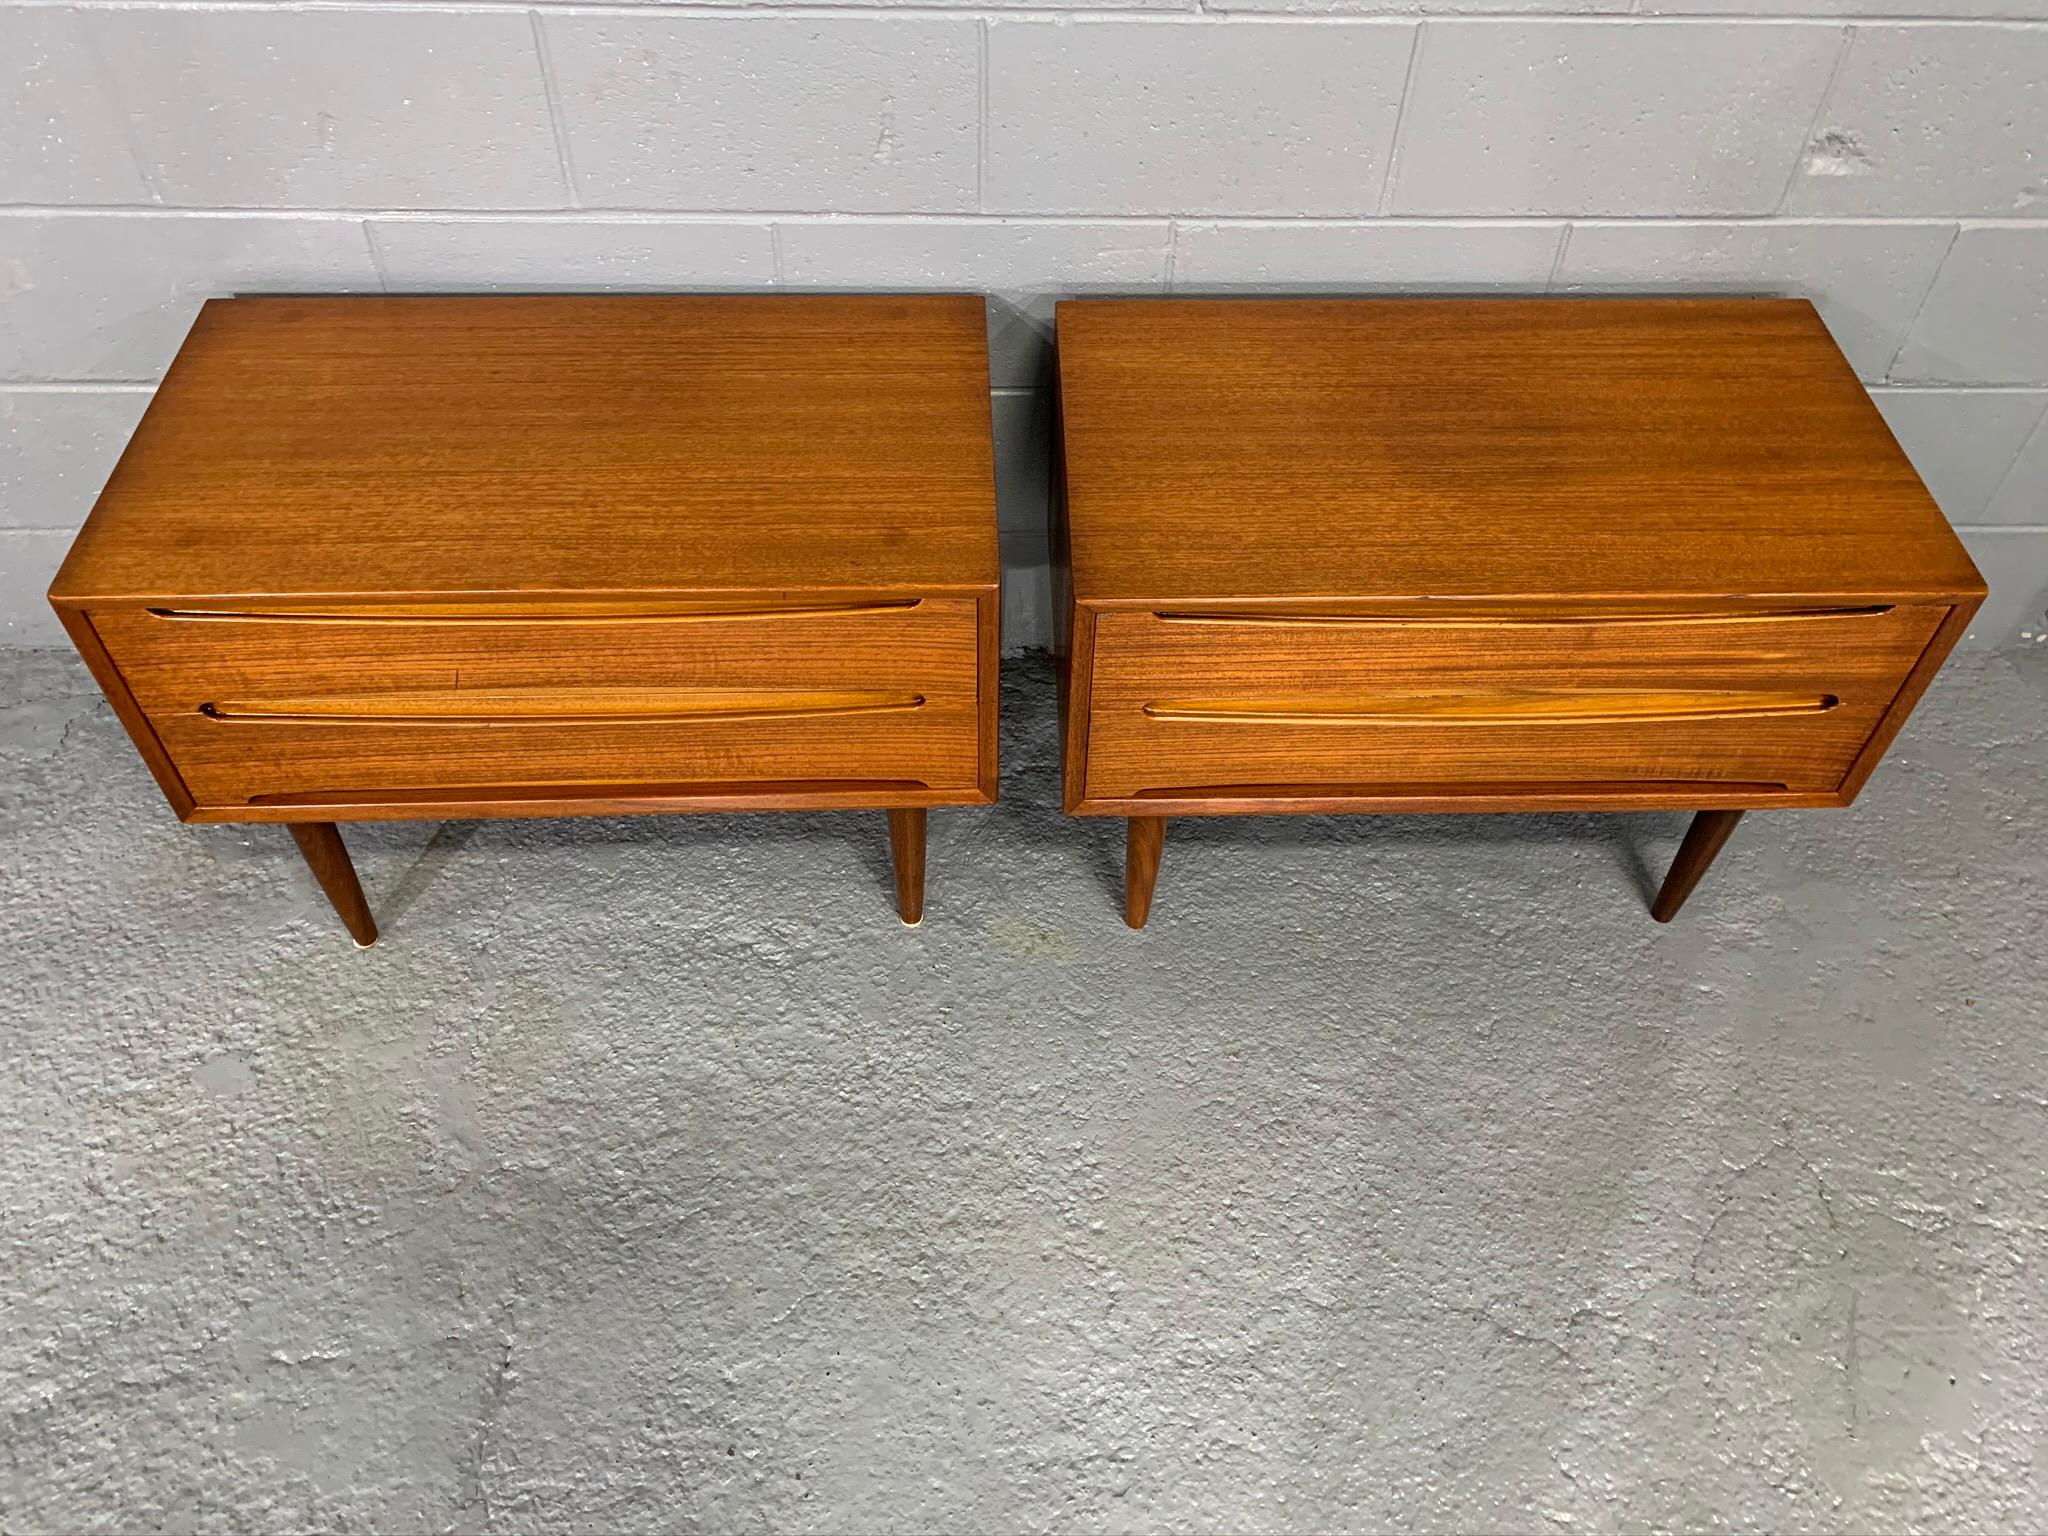 Handsome pair of teak Danish modern midcentury nightstands / end tables. Each piece has two drawers with handles elegantly crafted into the solid teak drawer front. Dovetailed joinery on each drawers.